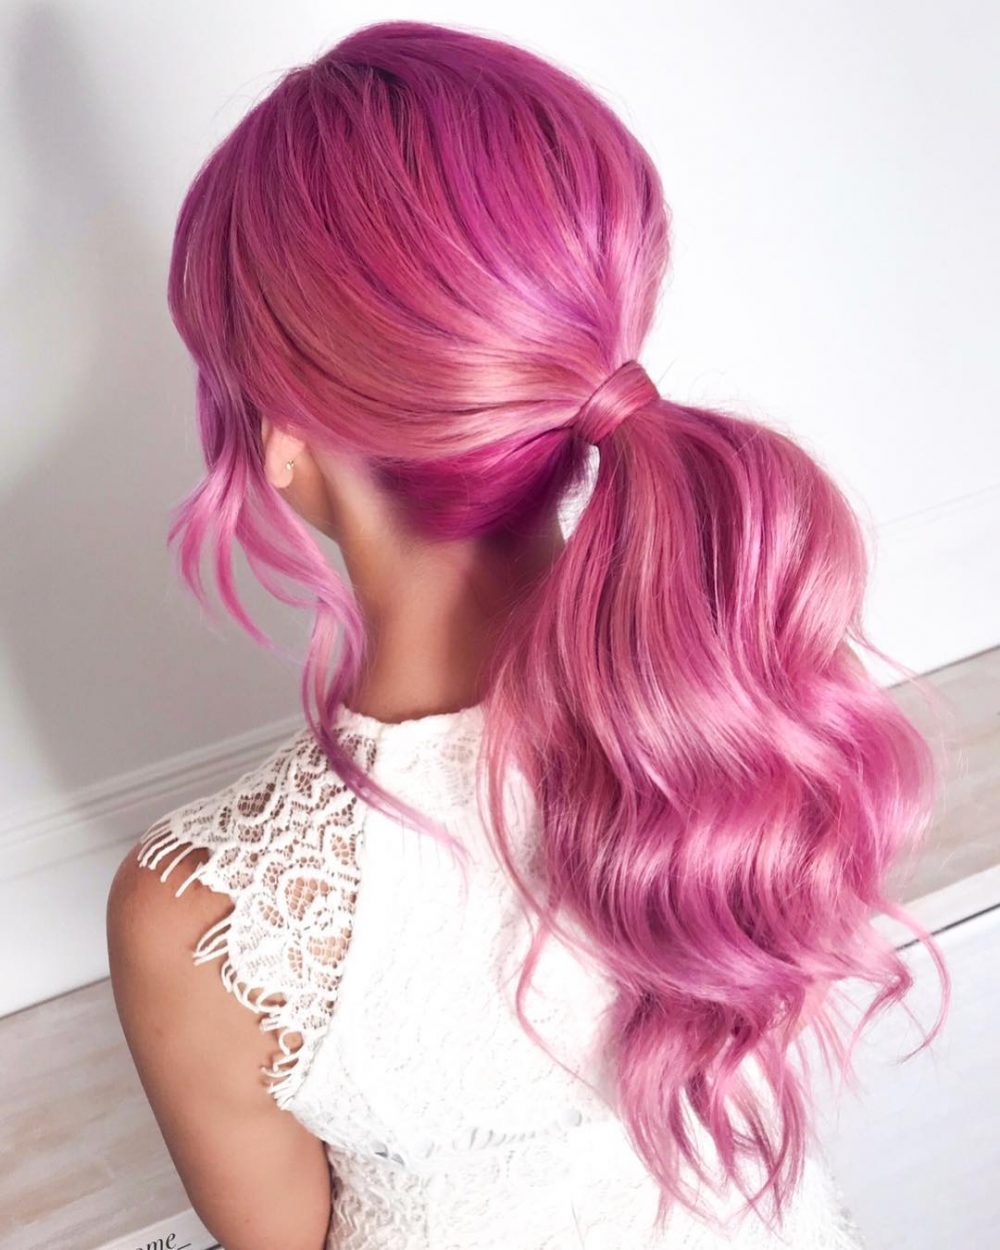 Icy Pink Hair